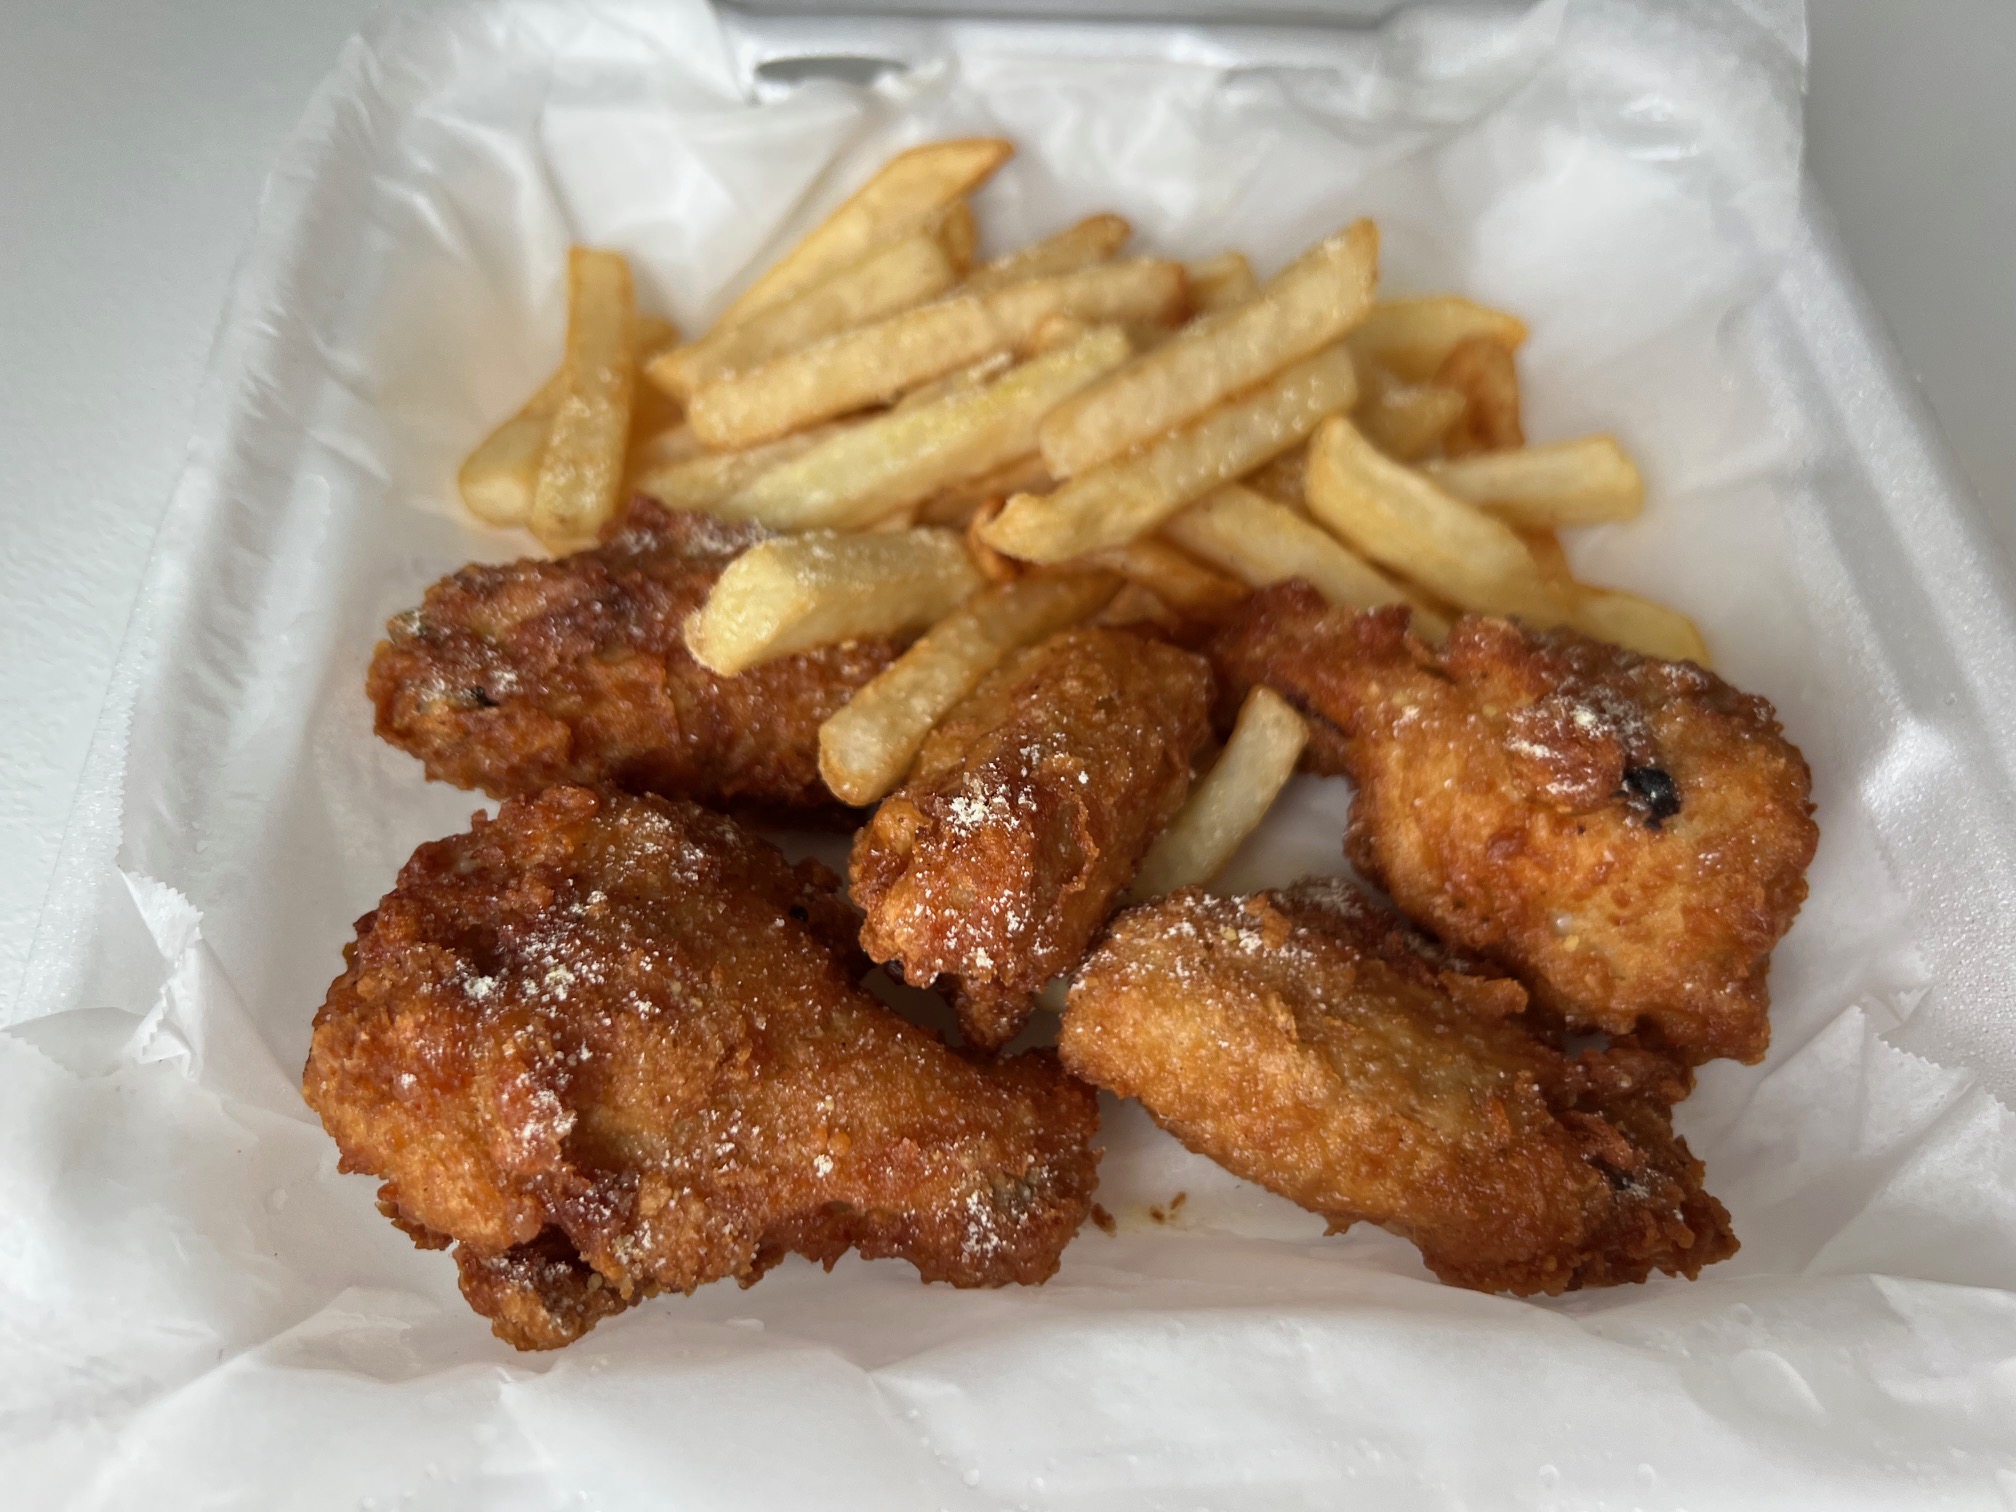 Five wings from Garro's Taste of the City are in a styrofoam box with a side of fries. Photo by Alyssa Buckley.